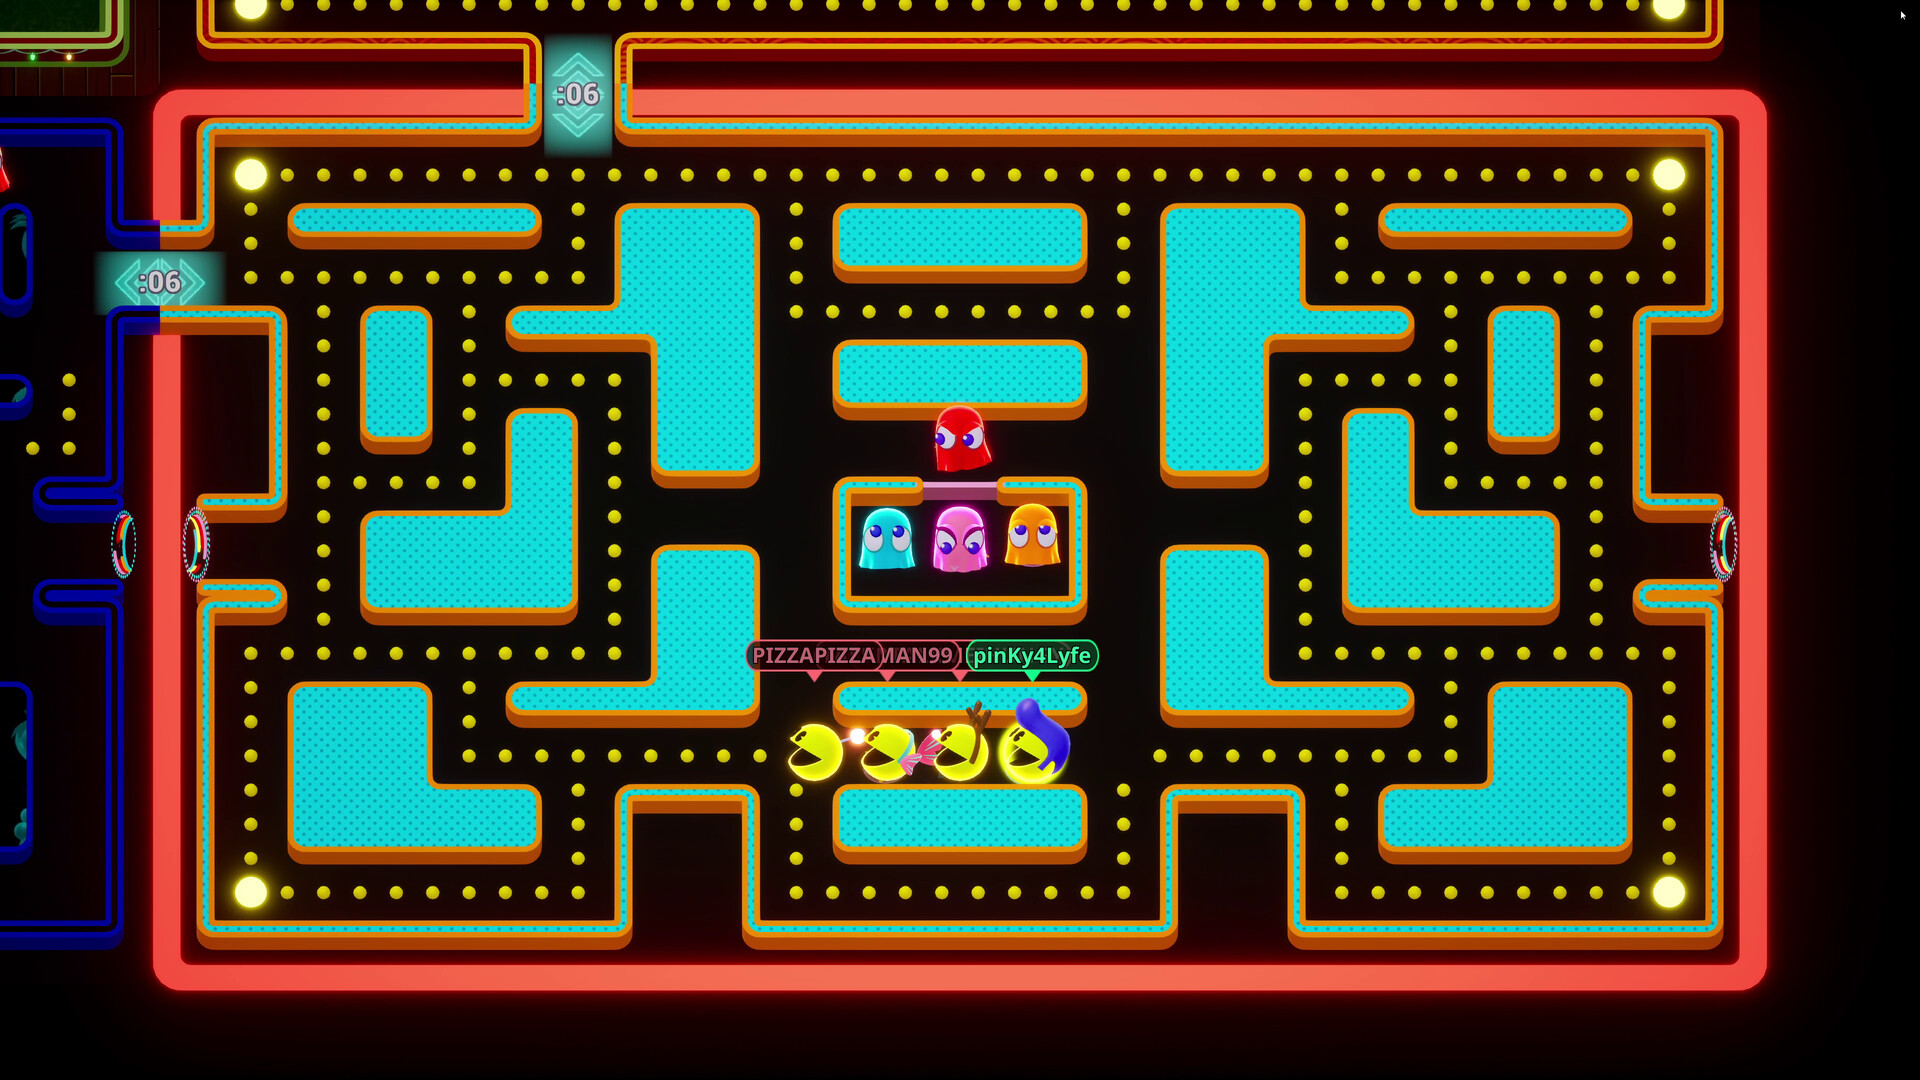 How to play PAC-MAN 99